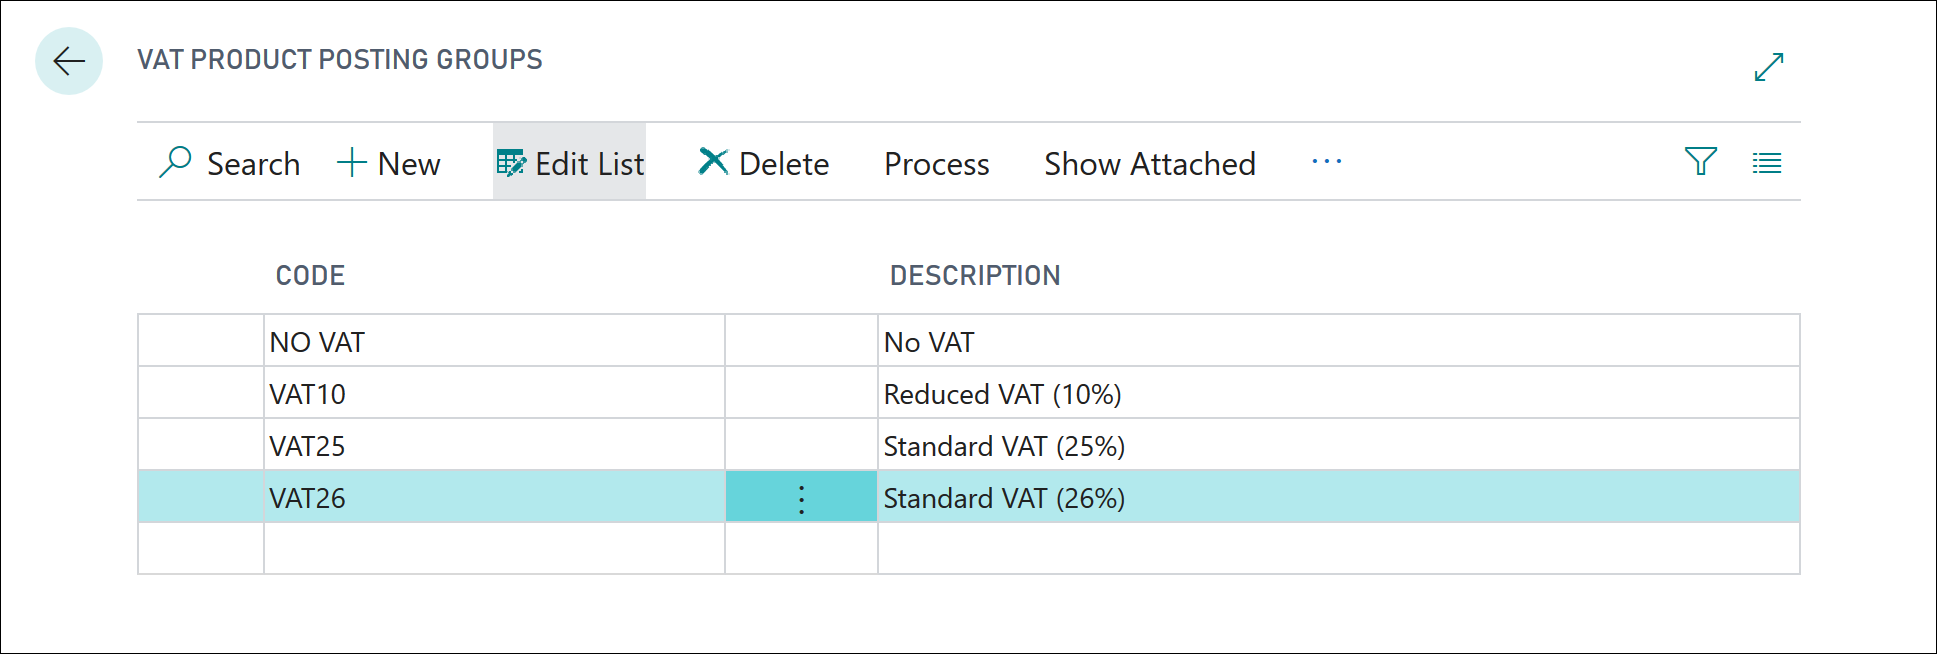 Screenshot of the new VAT product posting groups window.